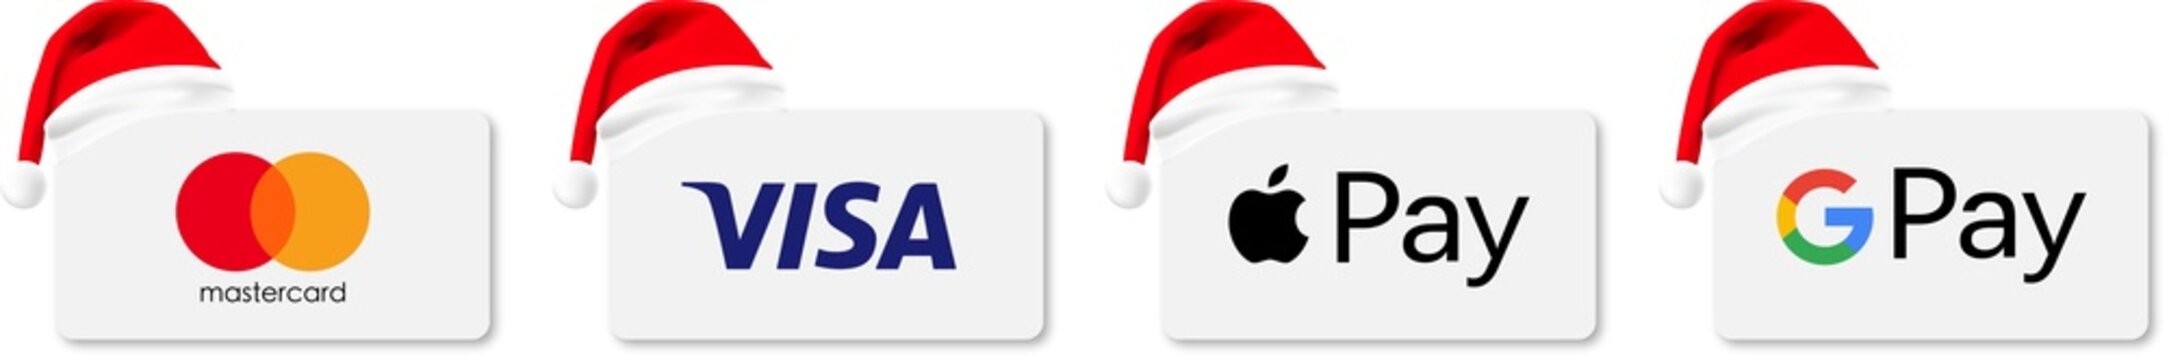 Buttons Of Popular Payment Systems Mastercard, Visa, Apple Pay, Google Pay. Buttons With Santa Hats For A Website Are Rectangular With Rounded Edges. PNG Image